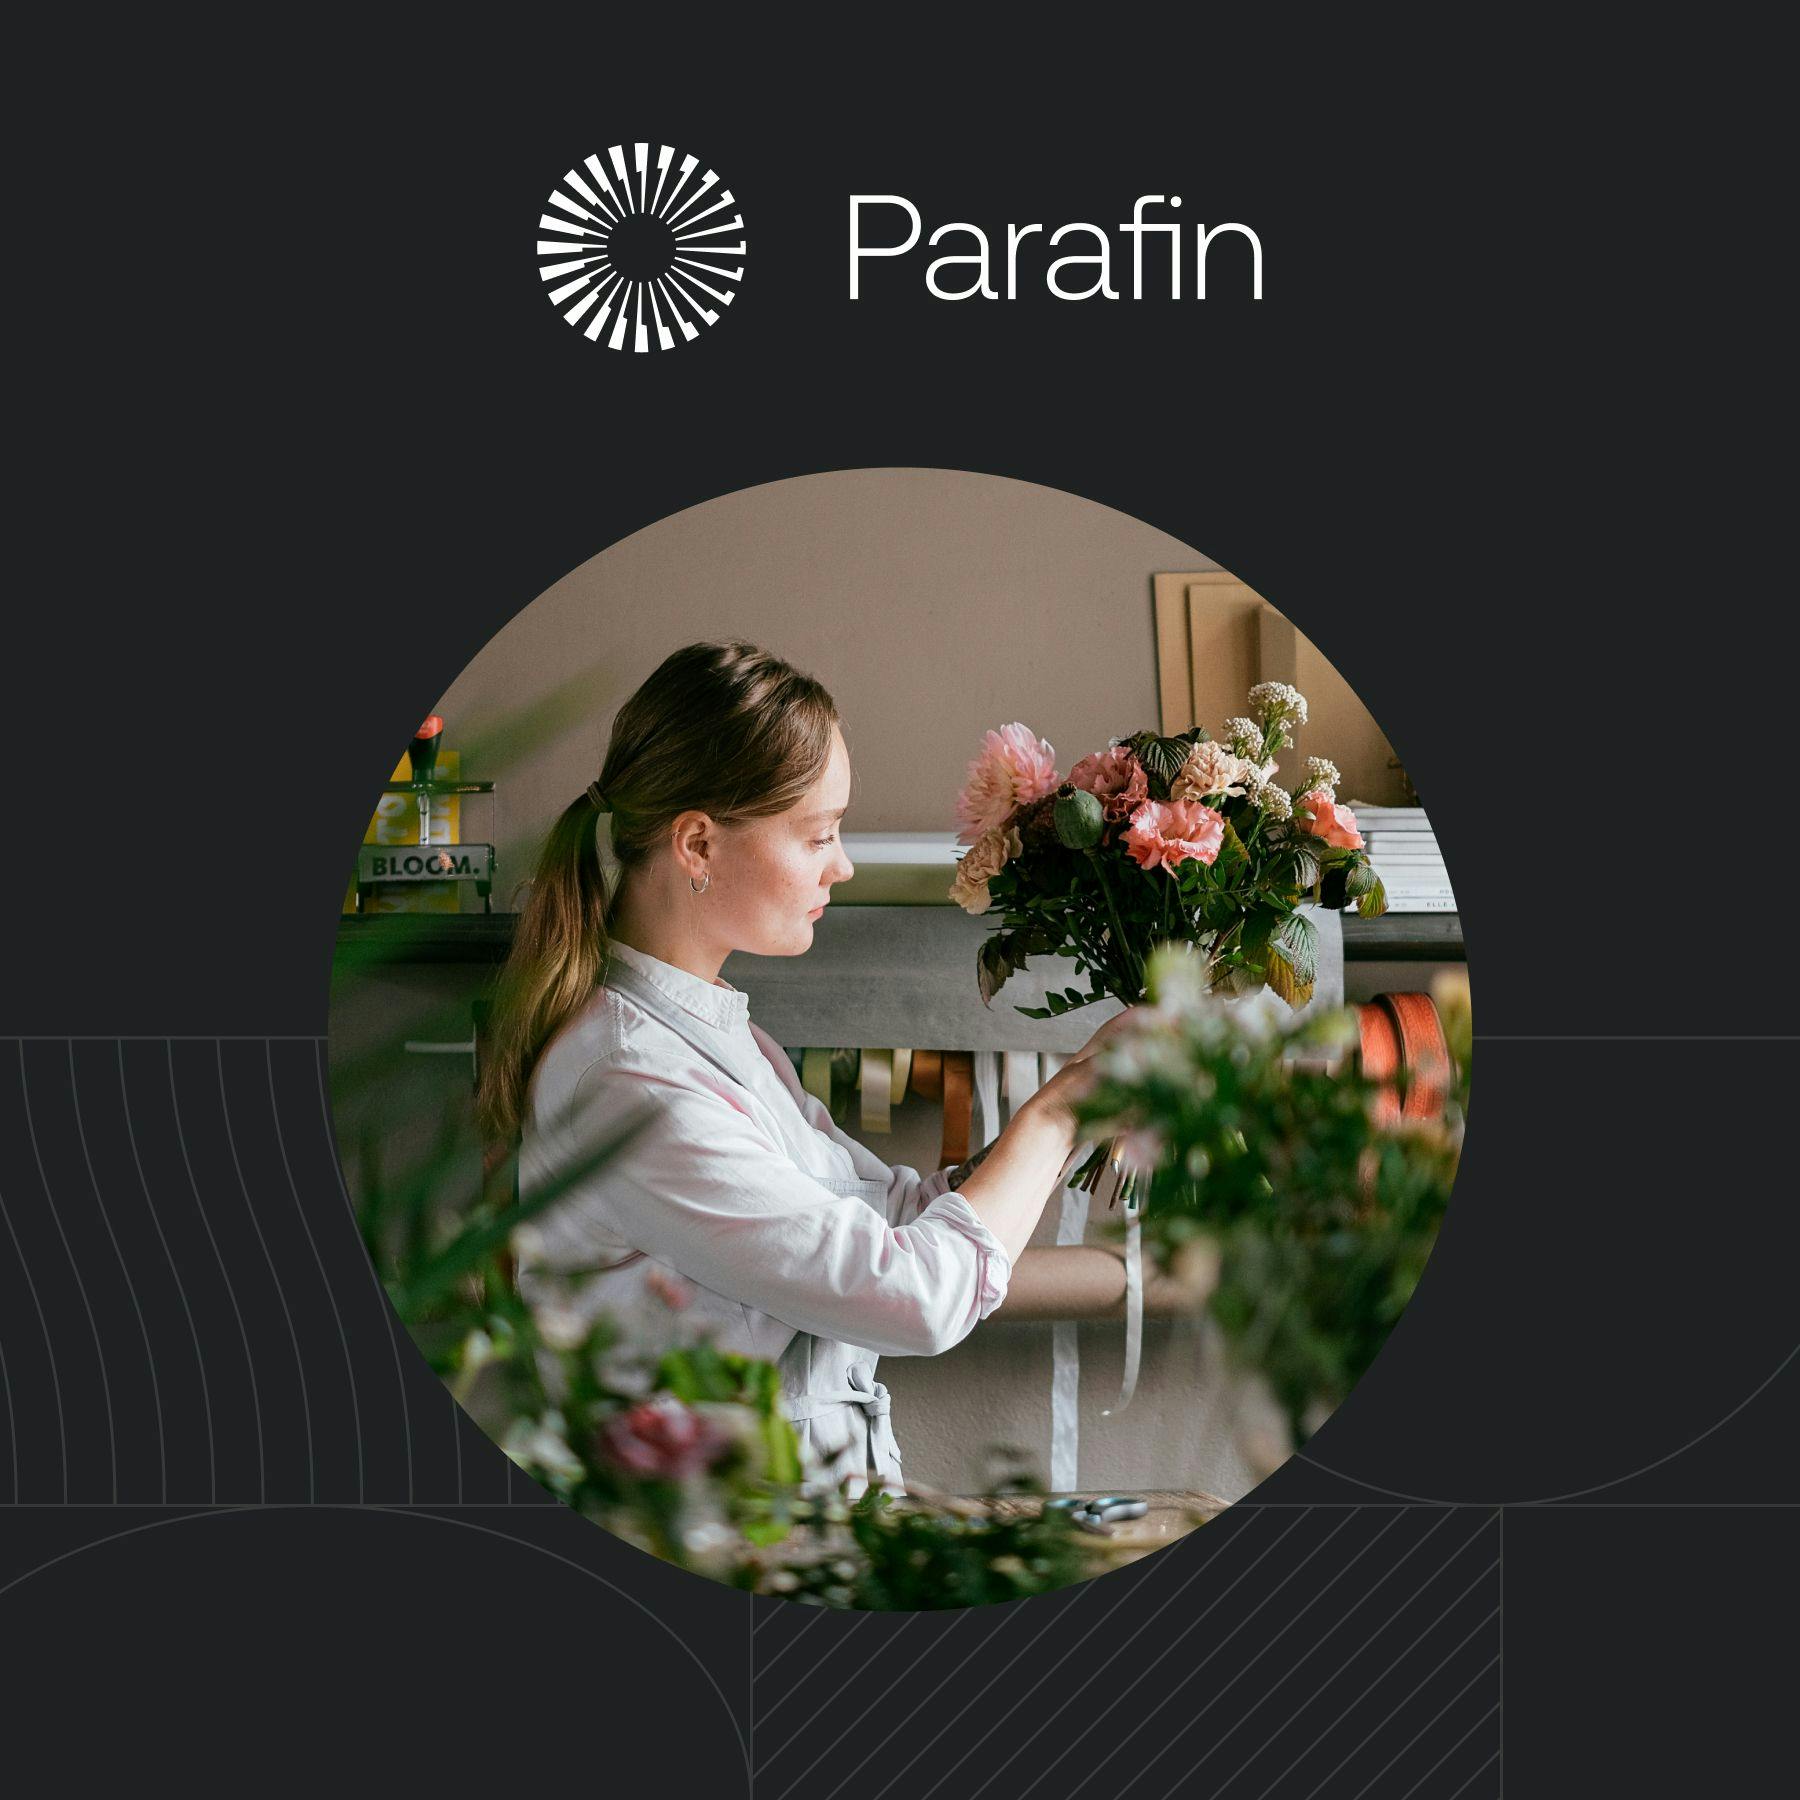 Photo of a woman building a flower arrangement with the Parafin logo superimposed